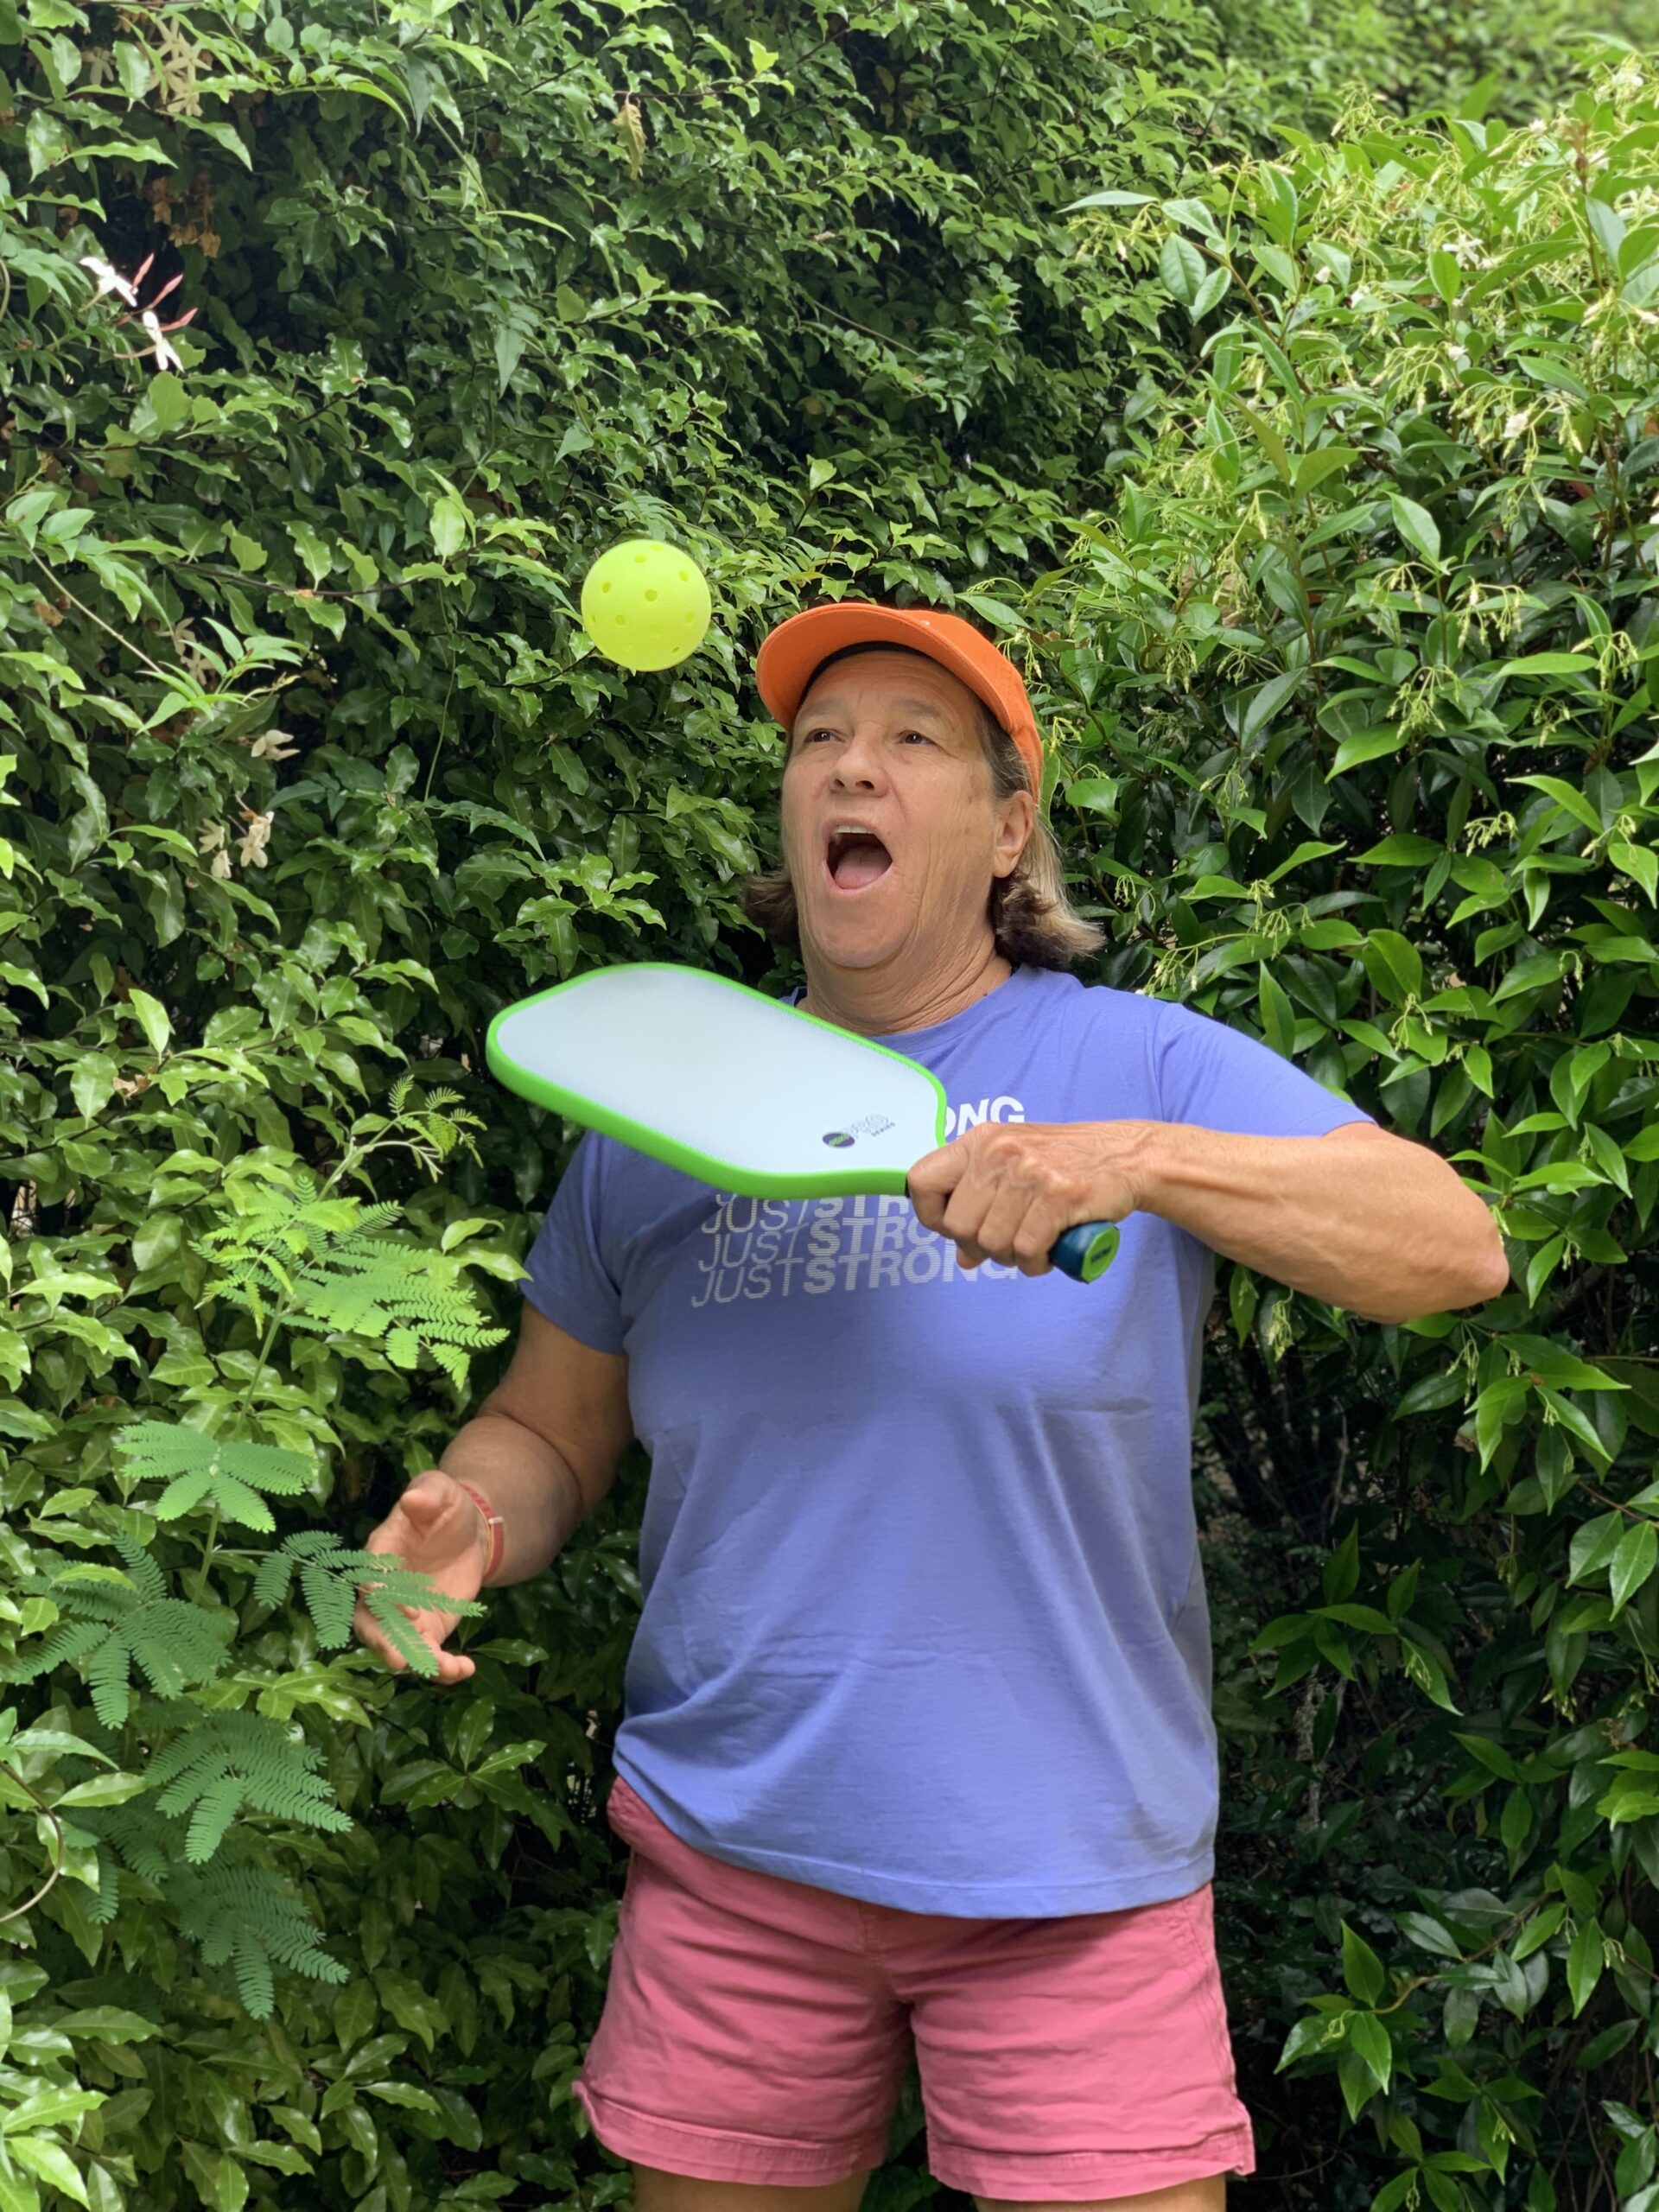 Dress to Dominate: On the Pickleball Court